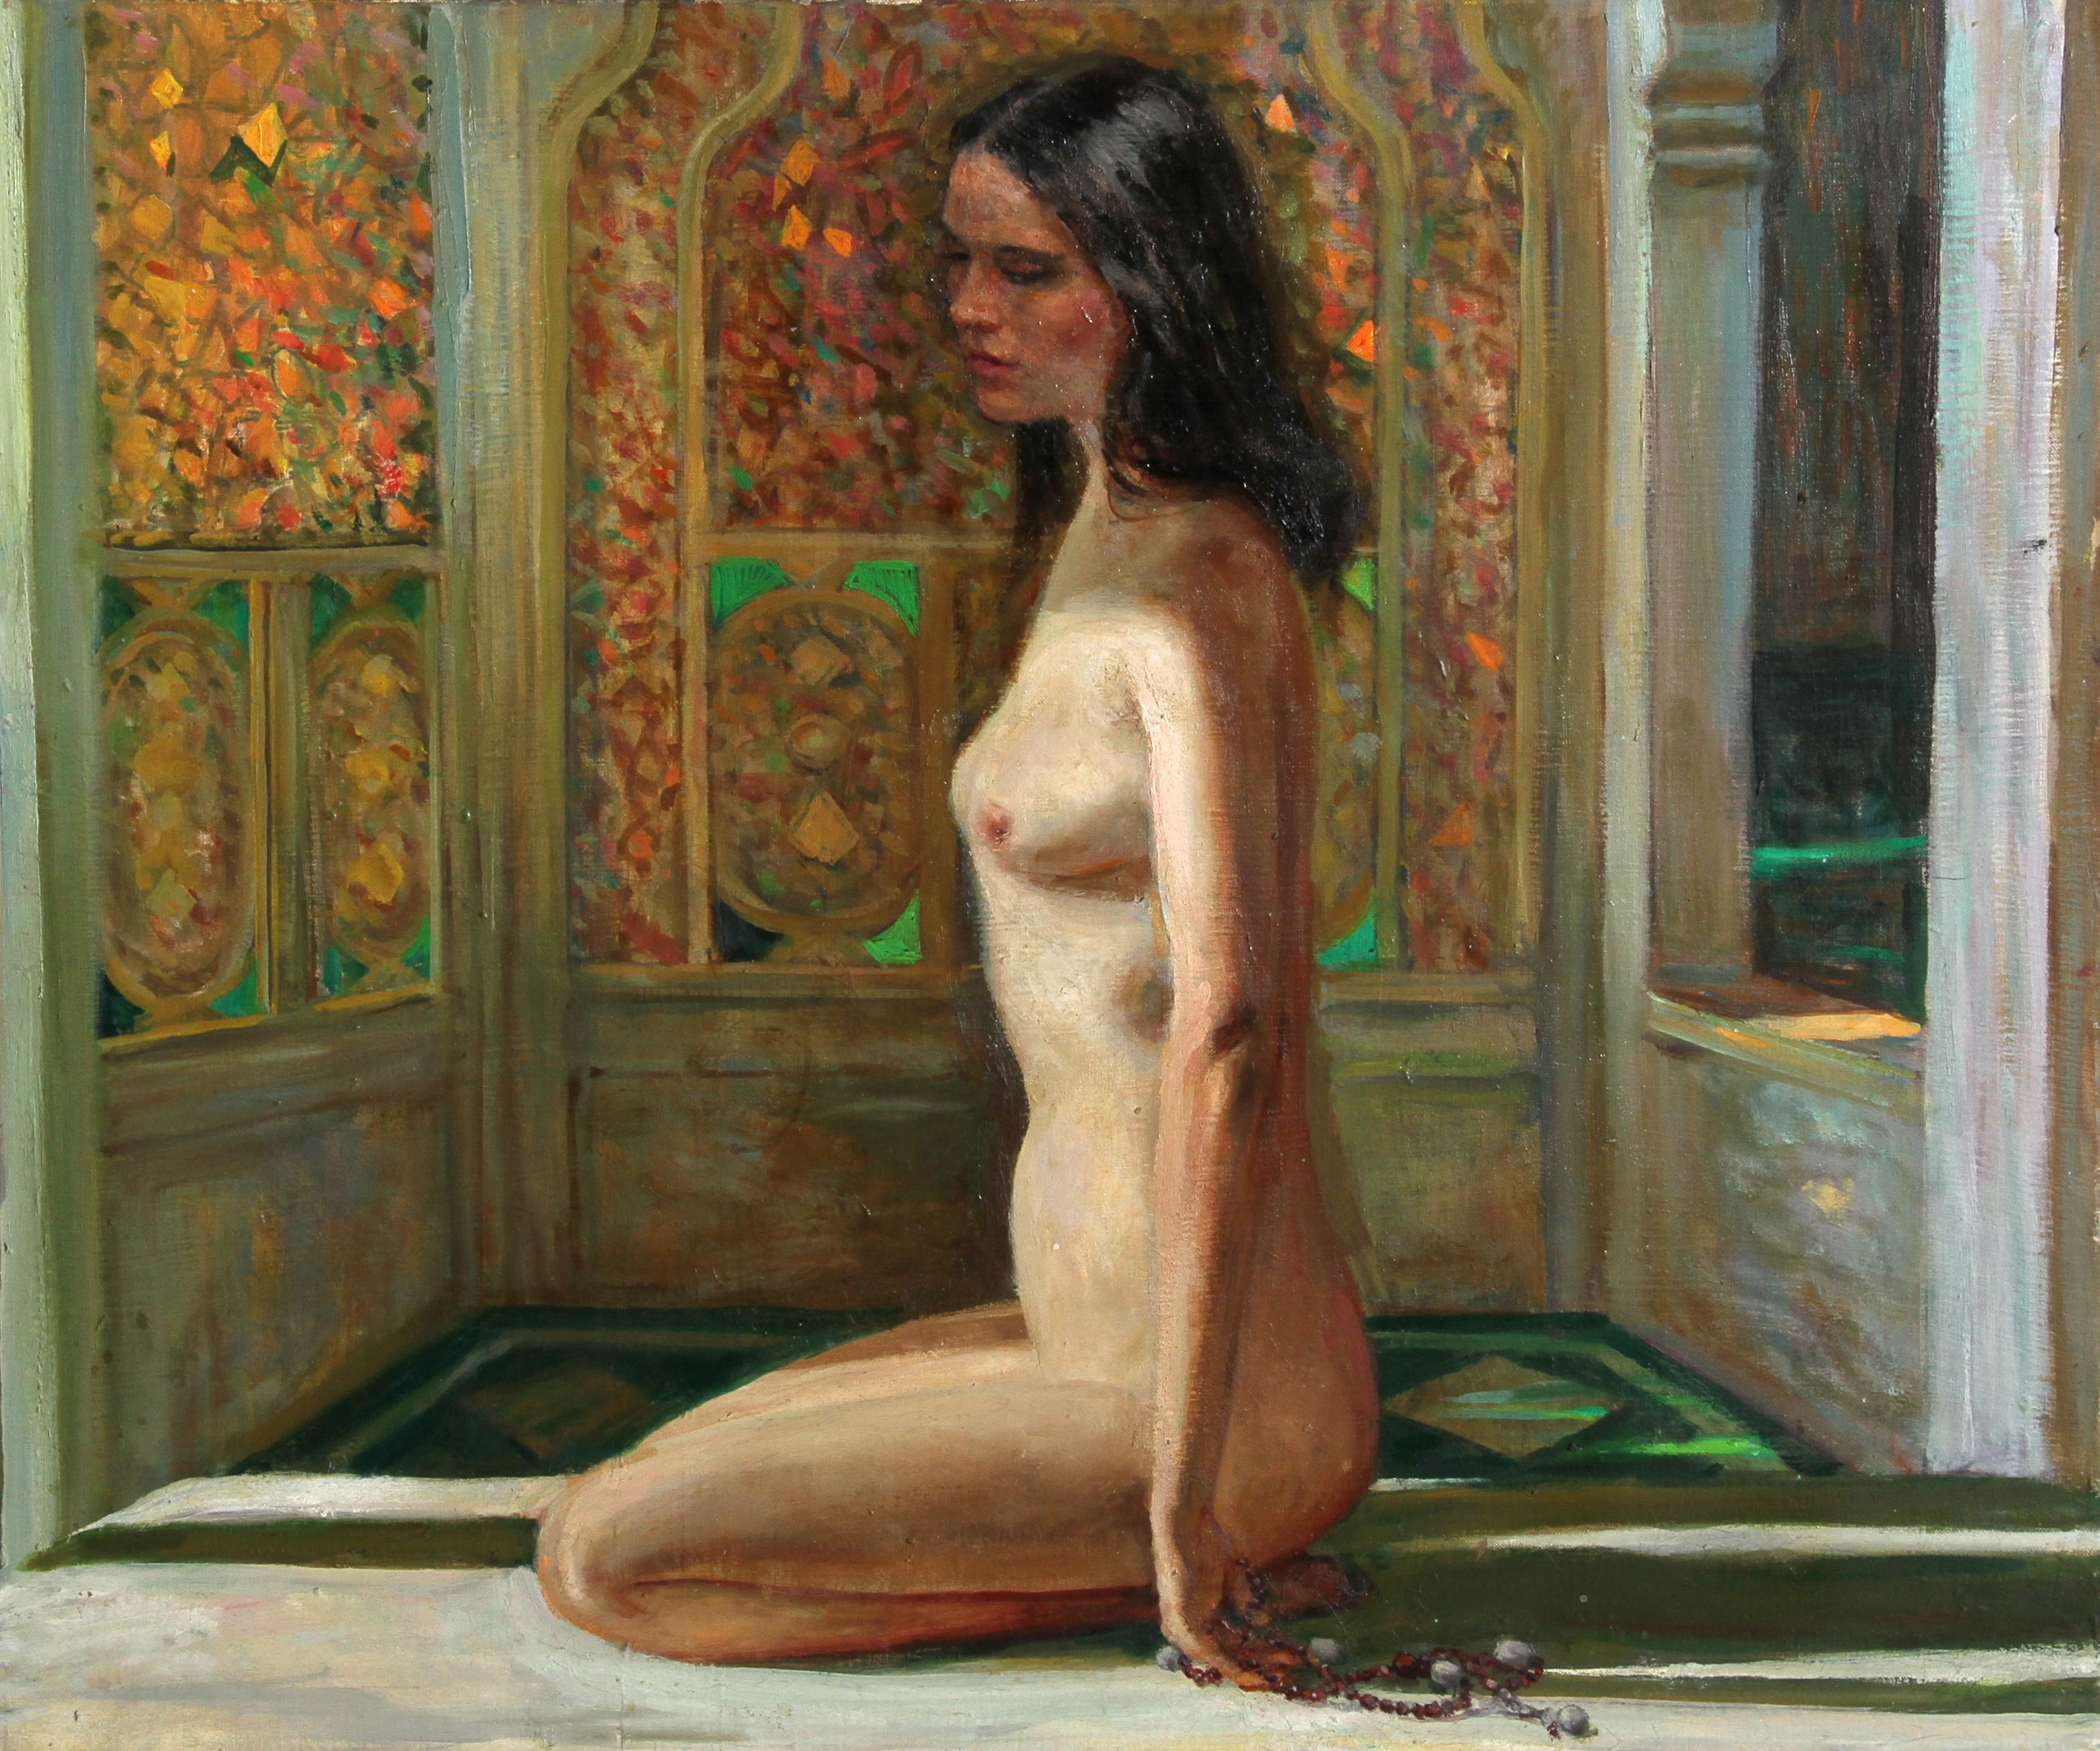 Nude Woman Seated by Stained Glass, Oil Painting by Marshall Goodman